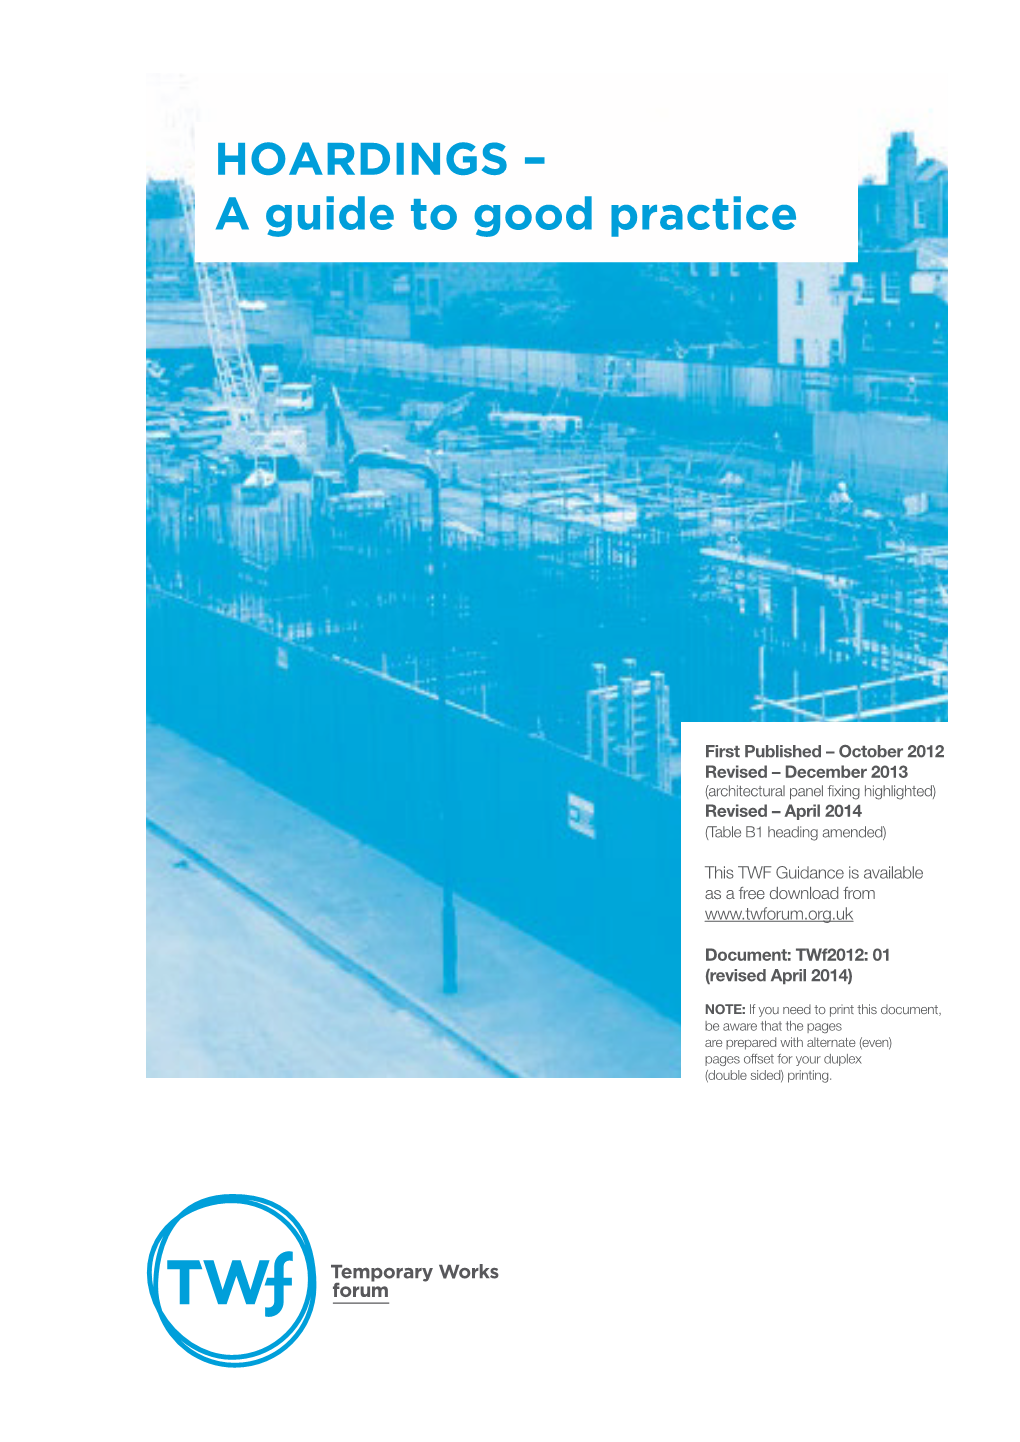 HOARDINGS – a Guide to Good Practice